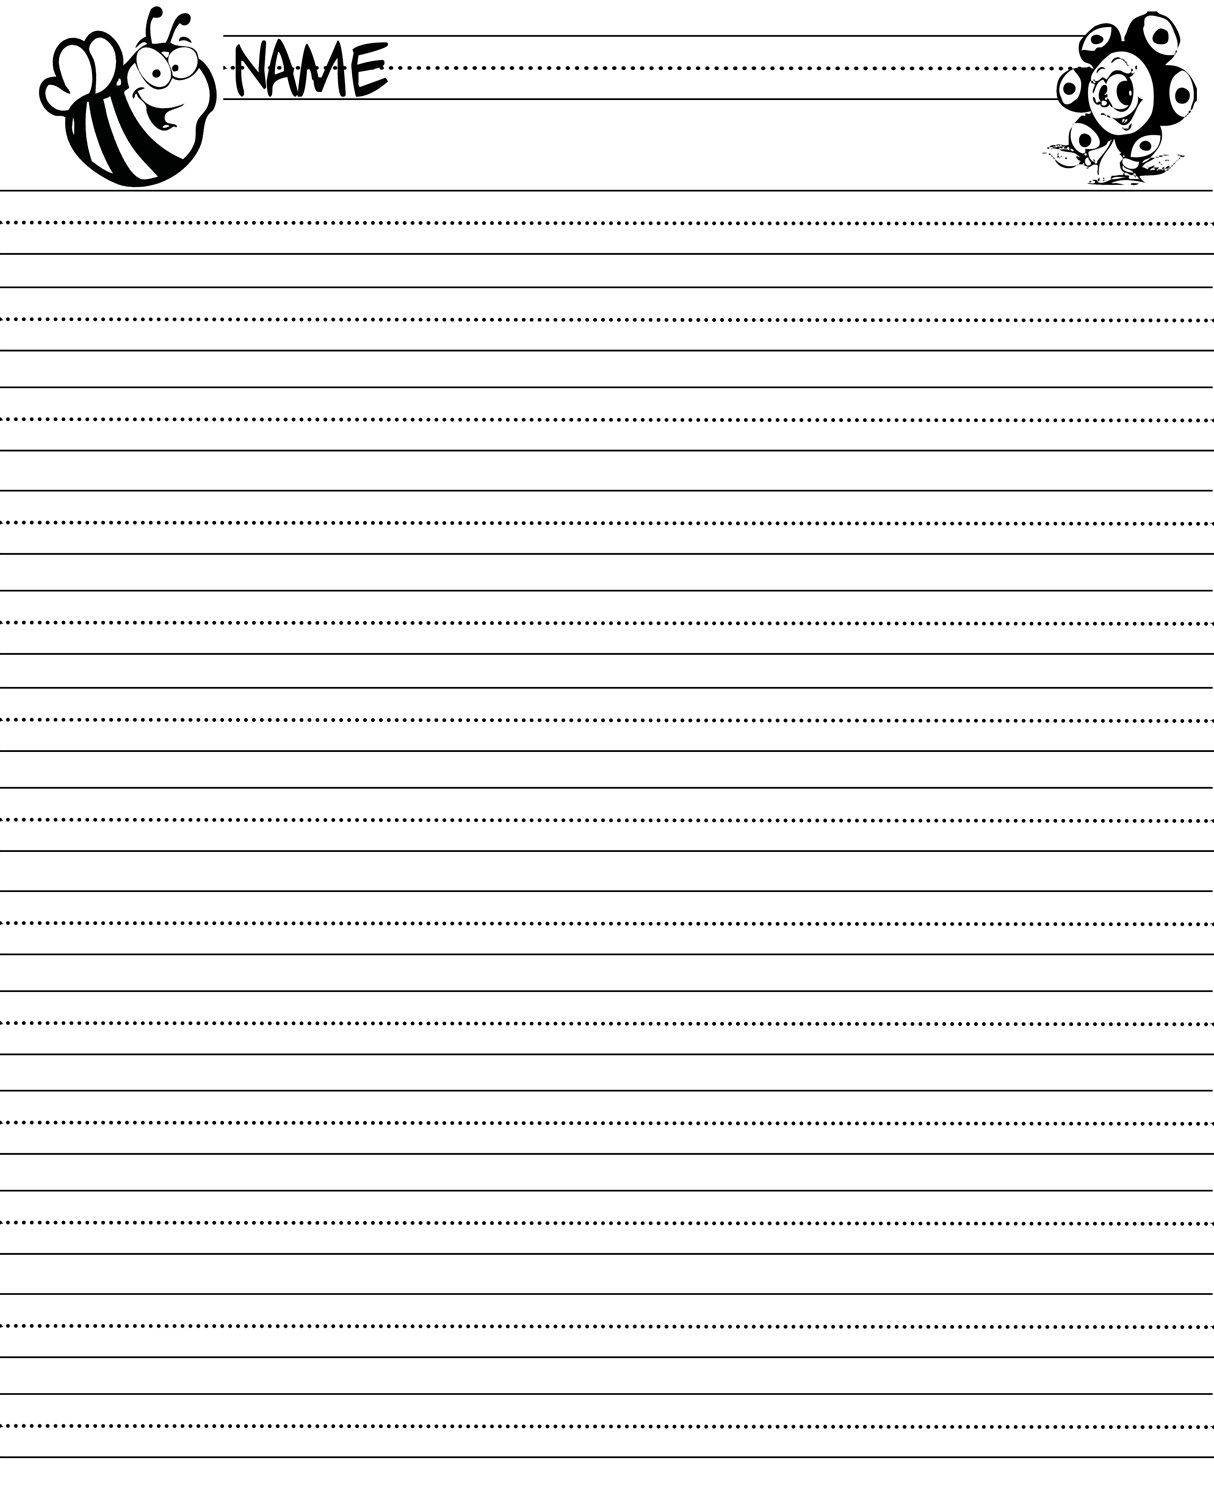 Printable Primary Writing Paper Template_82215